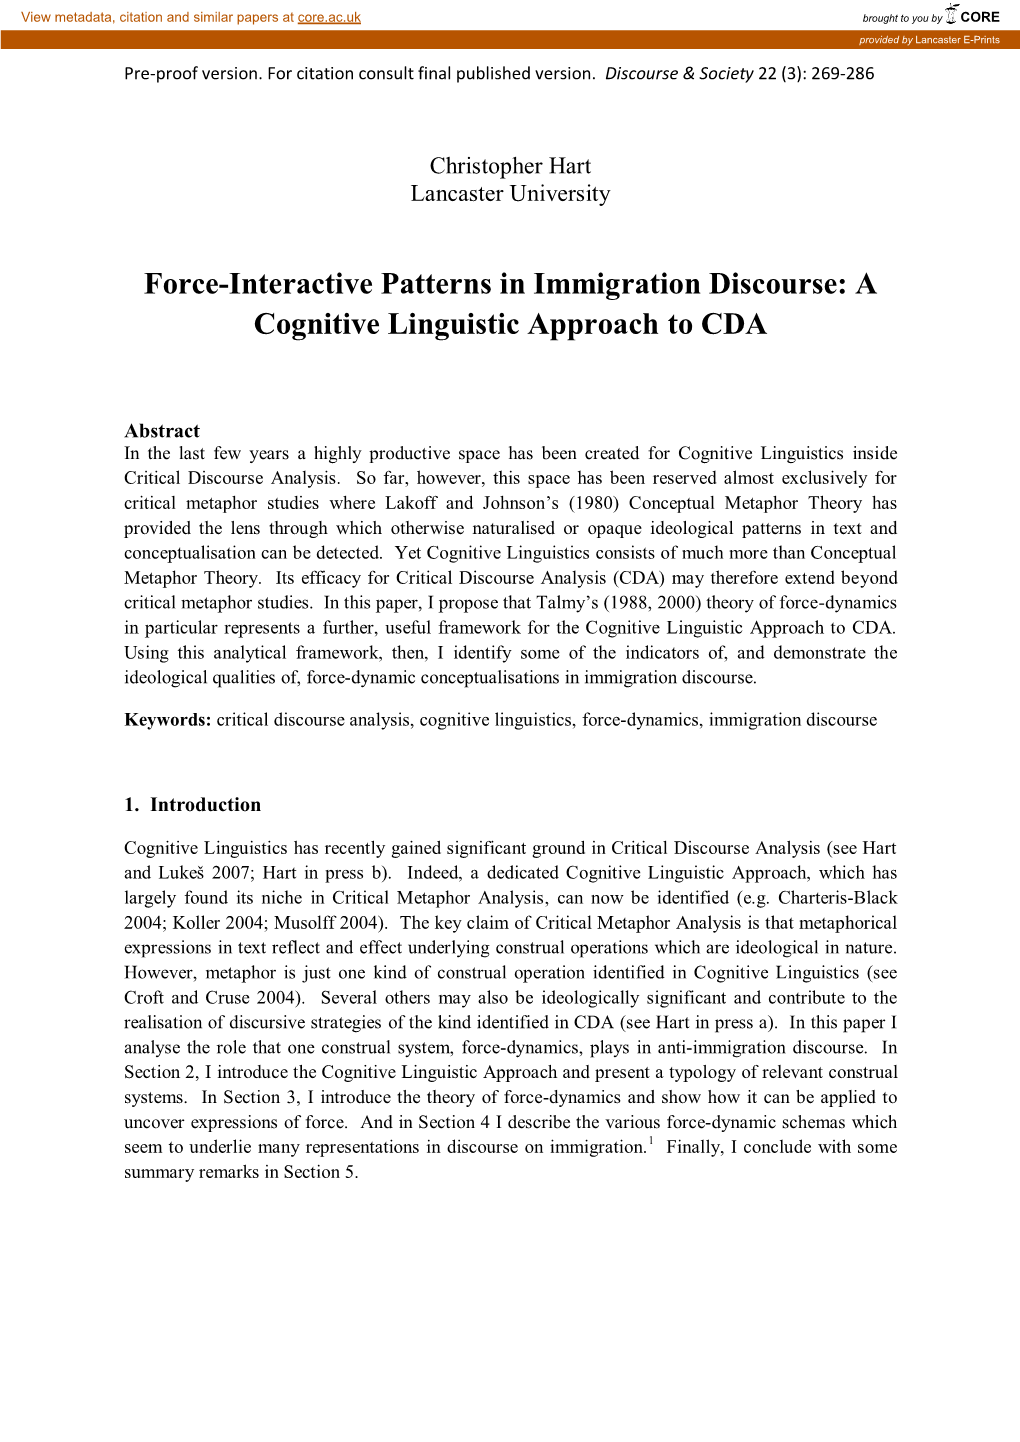 Force-Interactive Patterns in Immigration Discourse: a Cognitive Linguistic Approach to CDA